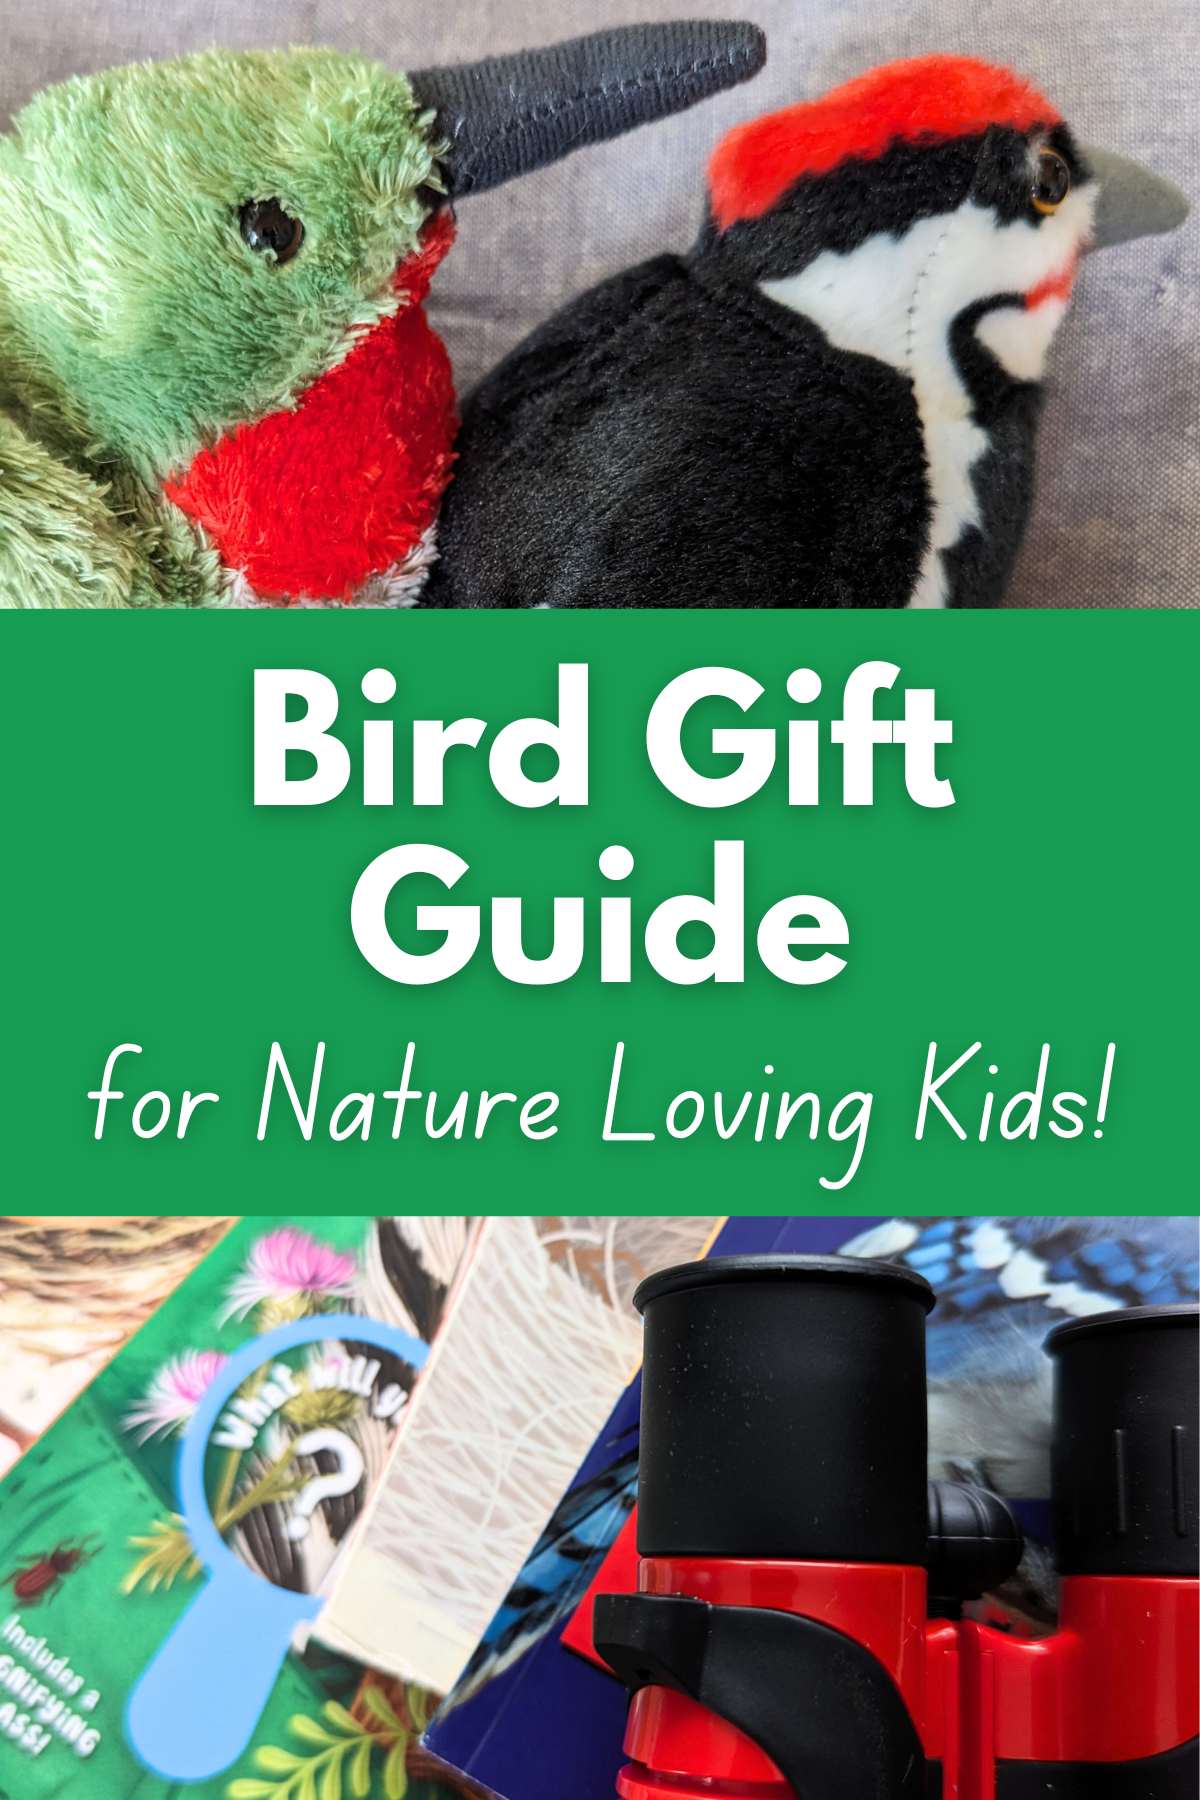 Two bird plush toys at the top with a collection of bird books with red and black binoculars at the bottom. Green rectangle in the middle with white text overlay.